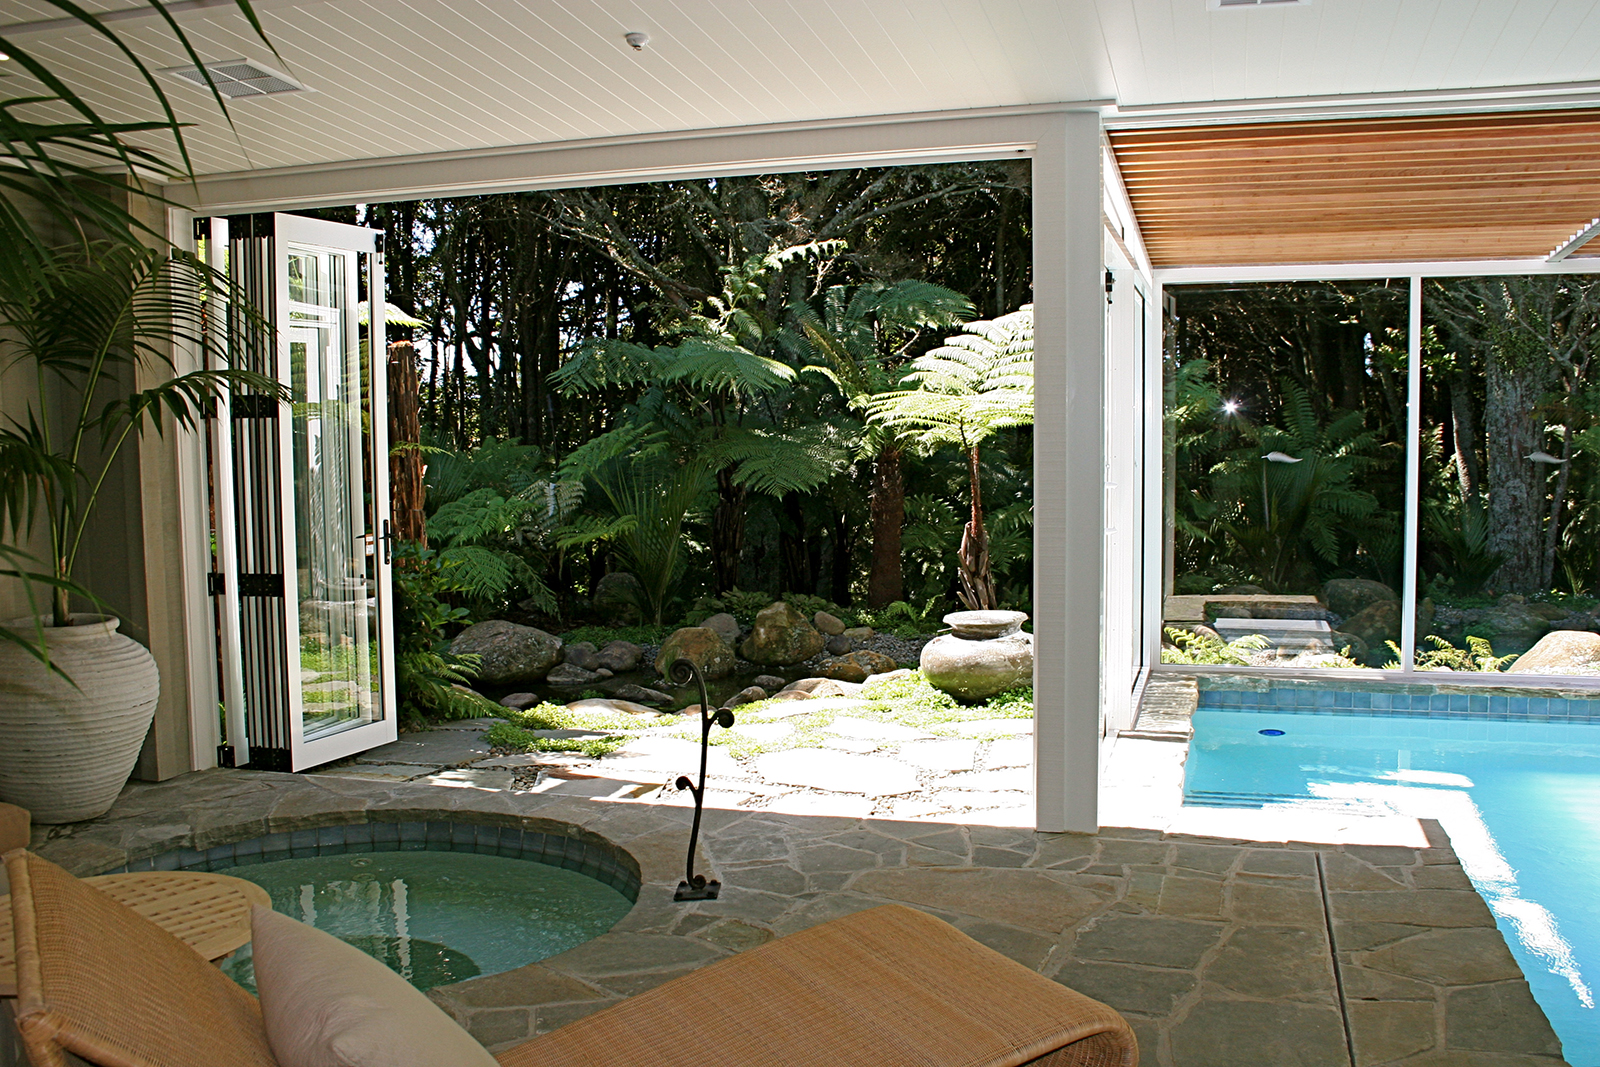 Landscaping around the spa by Hawthorn Landscape Architects